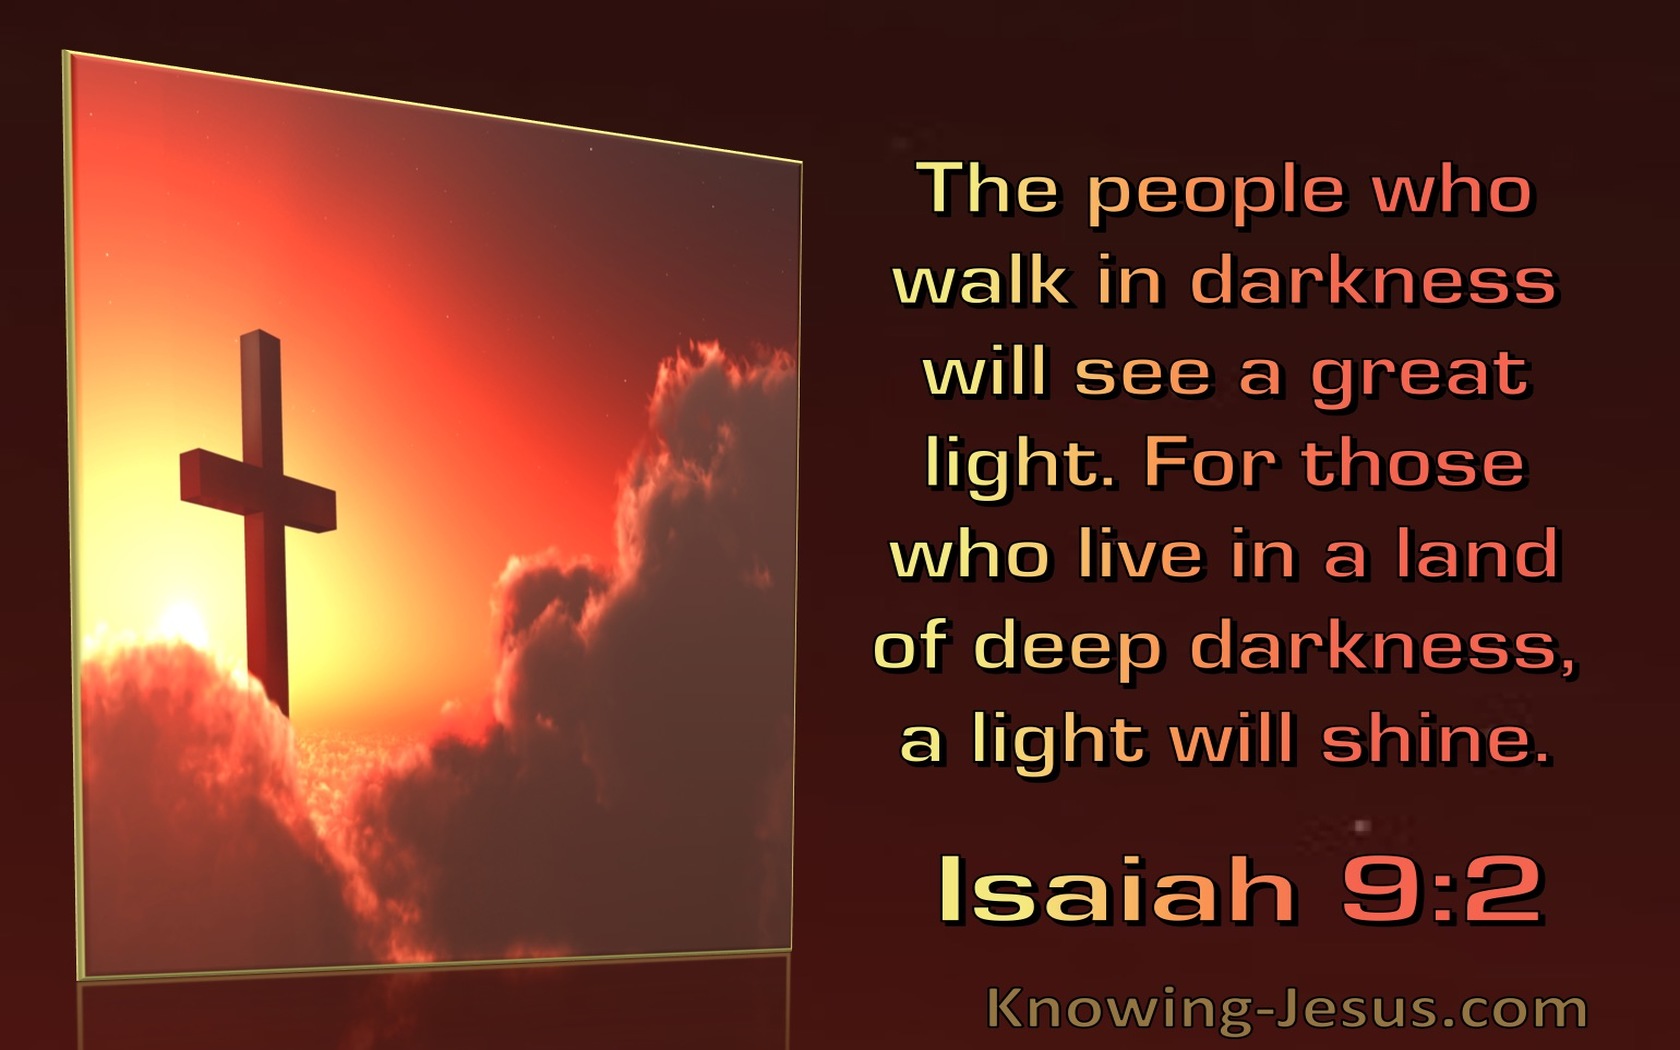 Isaiah 9:2 The People Who Walk In Darkness Will See A Great Light (windows)06:27